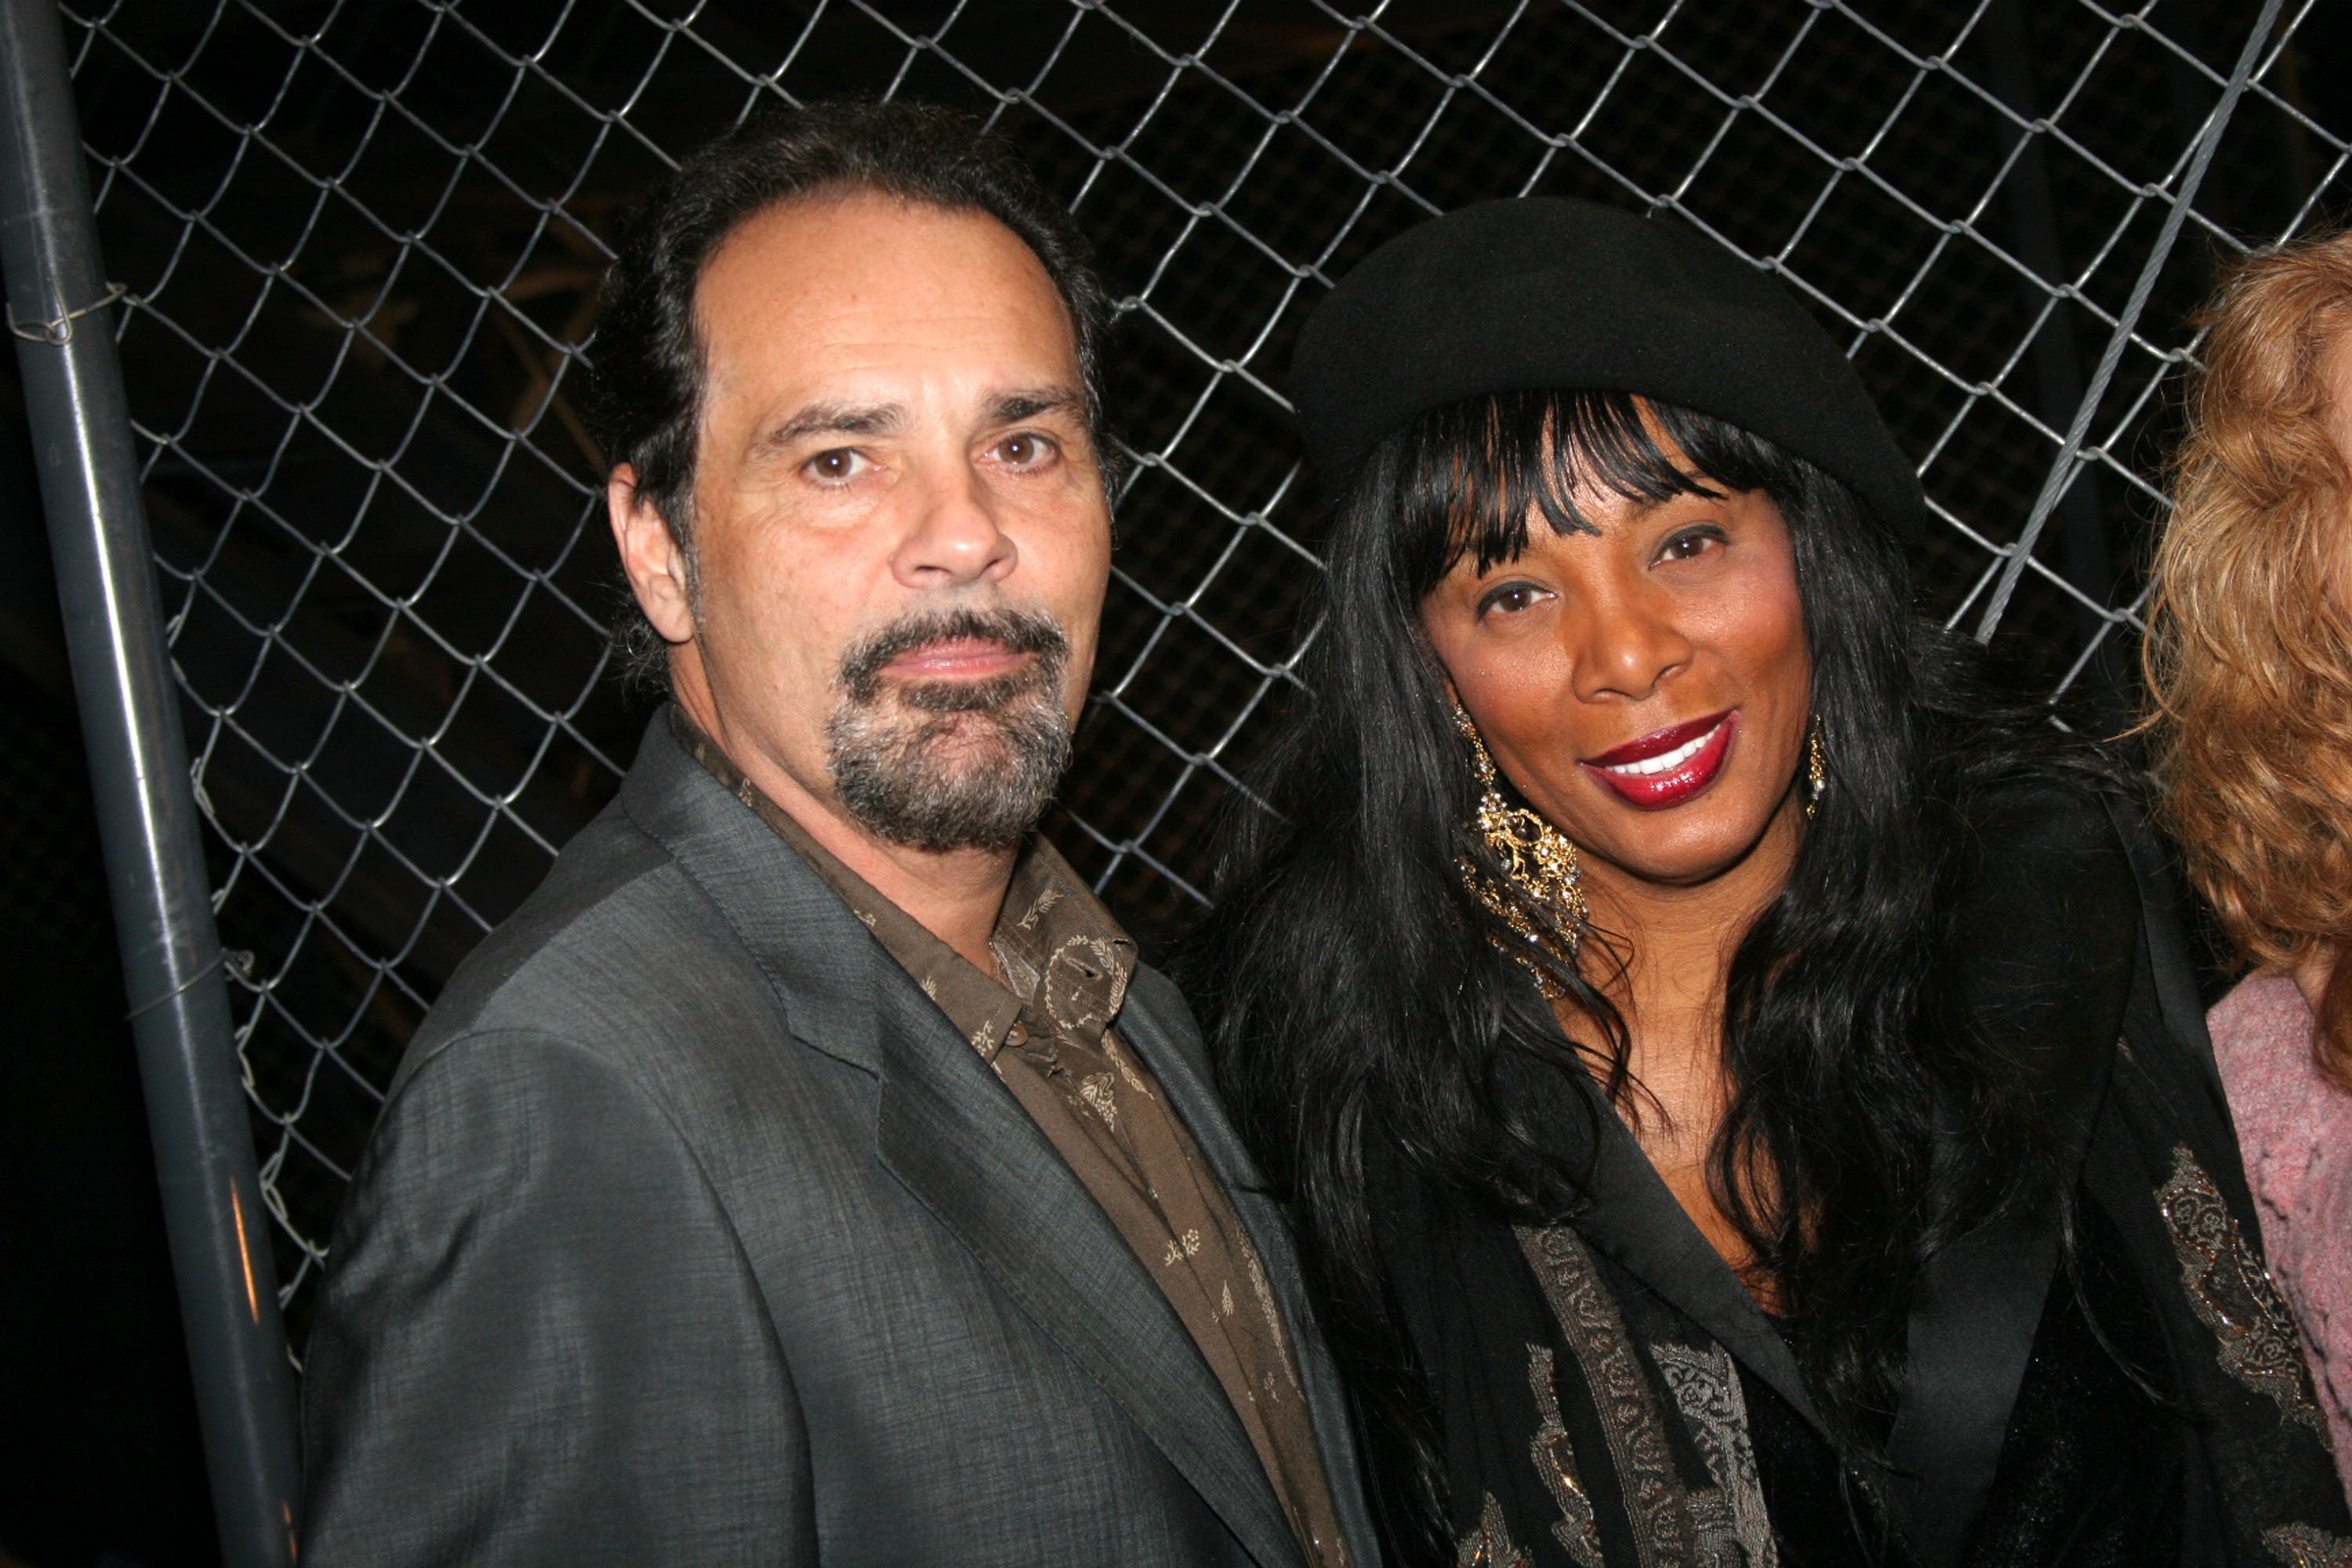 Bruce Sudano and wife Donna Summer during Donna Summer Meets Broadway's "Jersey Boys" - November 16, 2005 at The August Wilson Theater in New York City, New York | Source: Getty Images